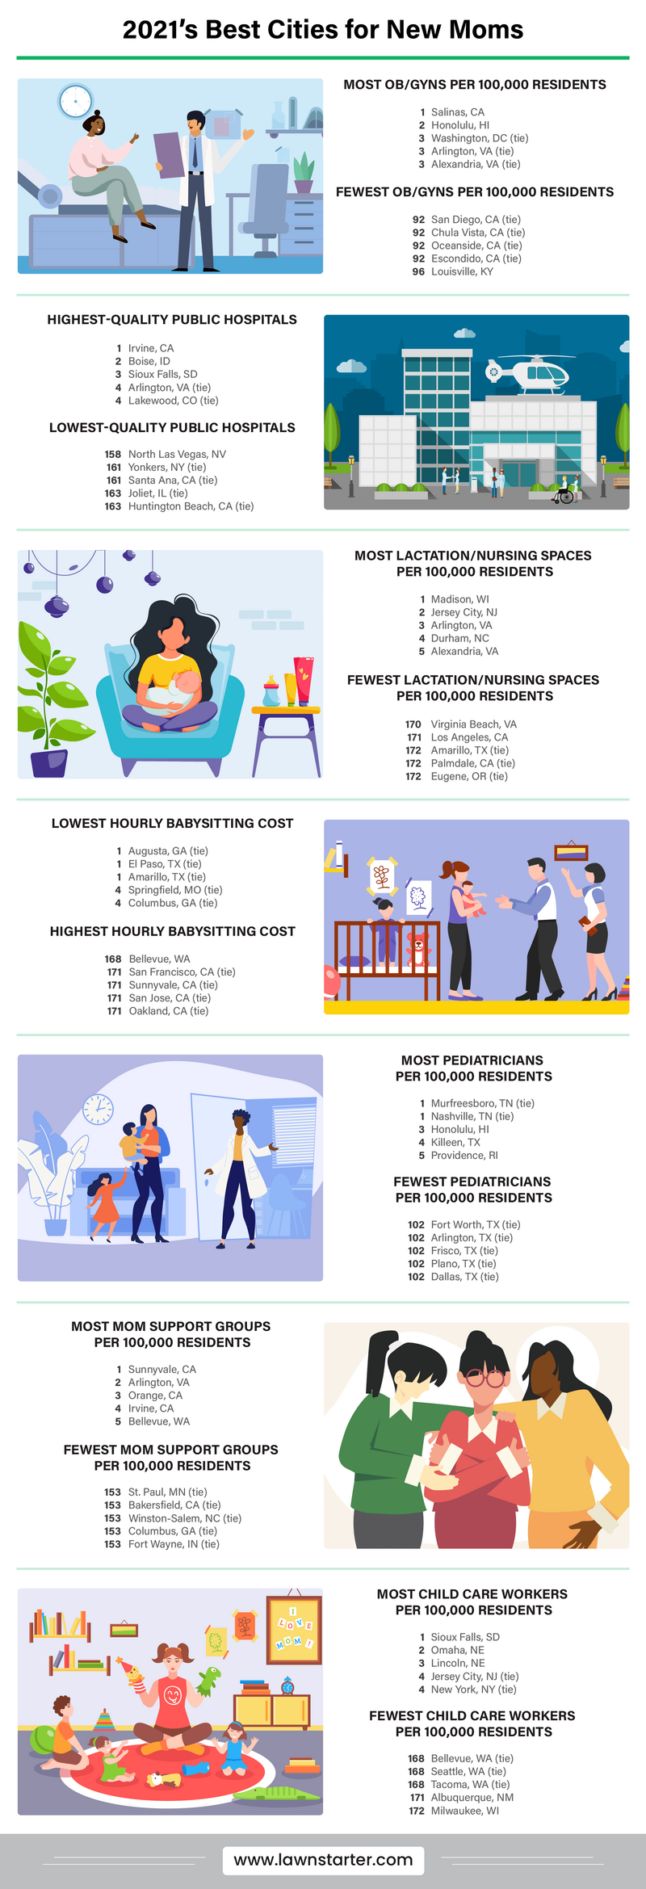 infographic depicting the best cities for new moms